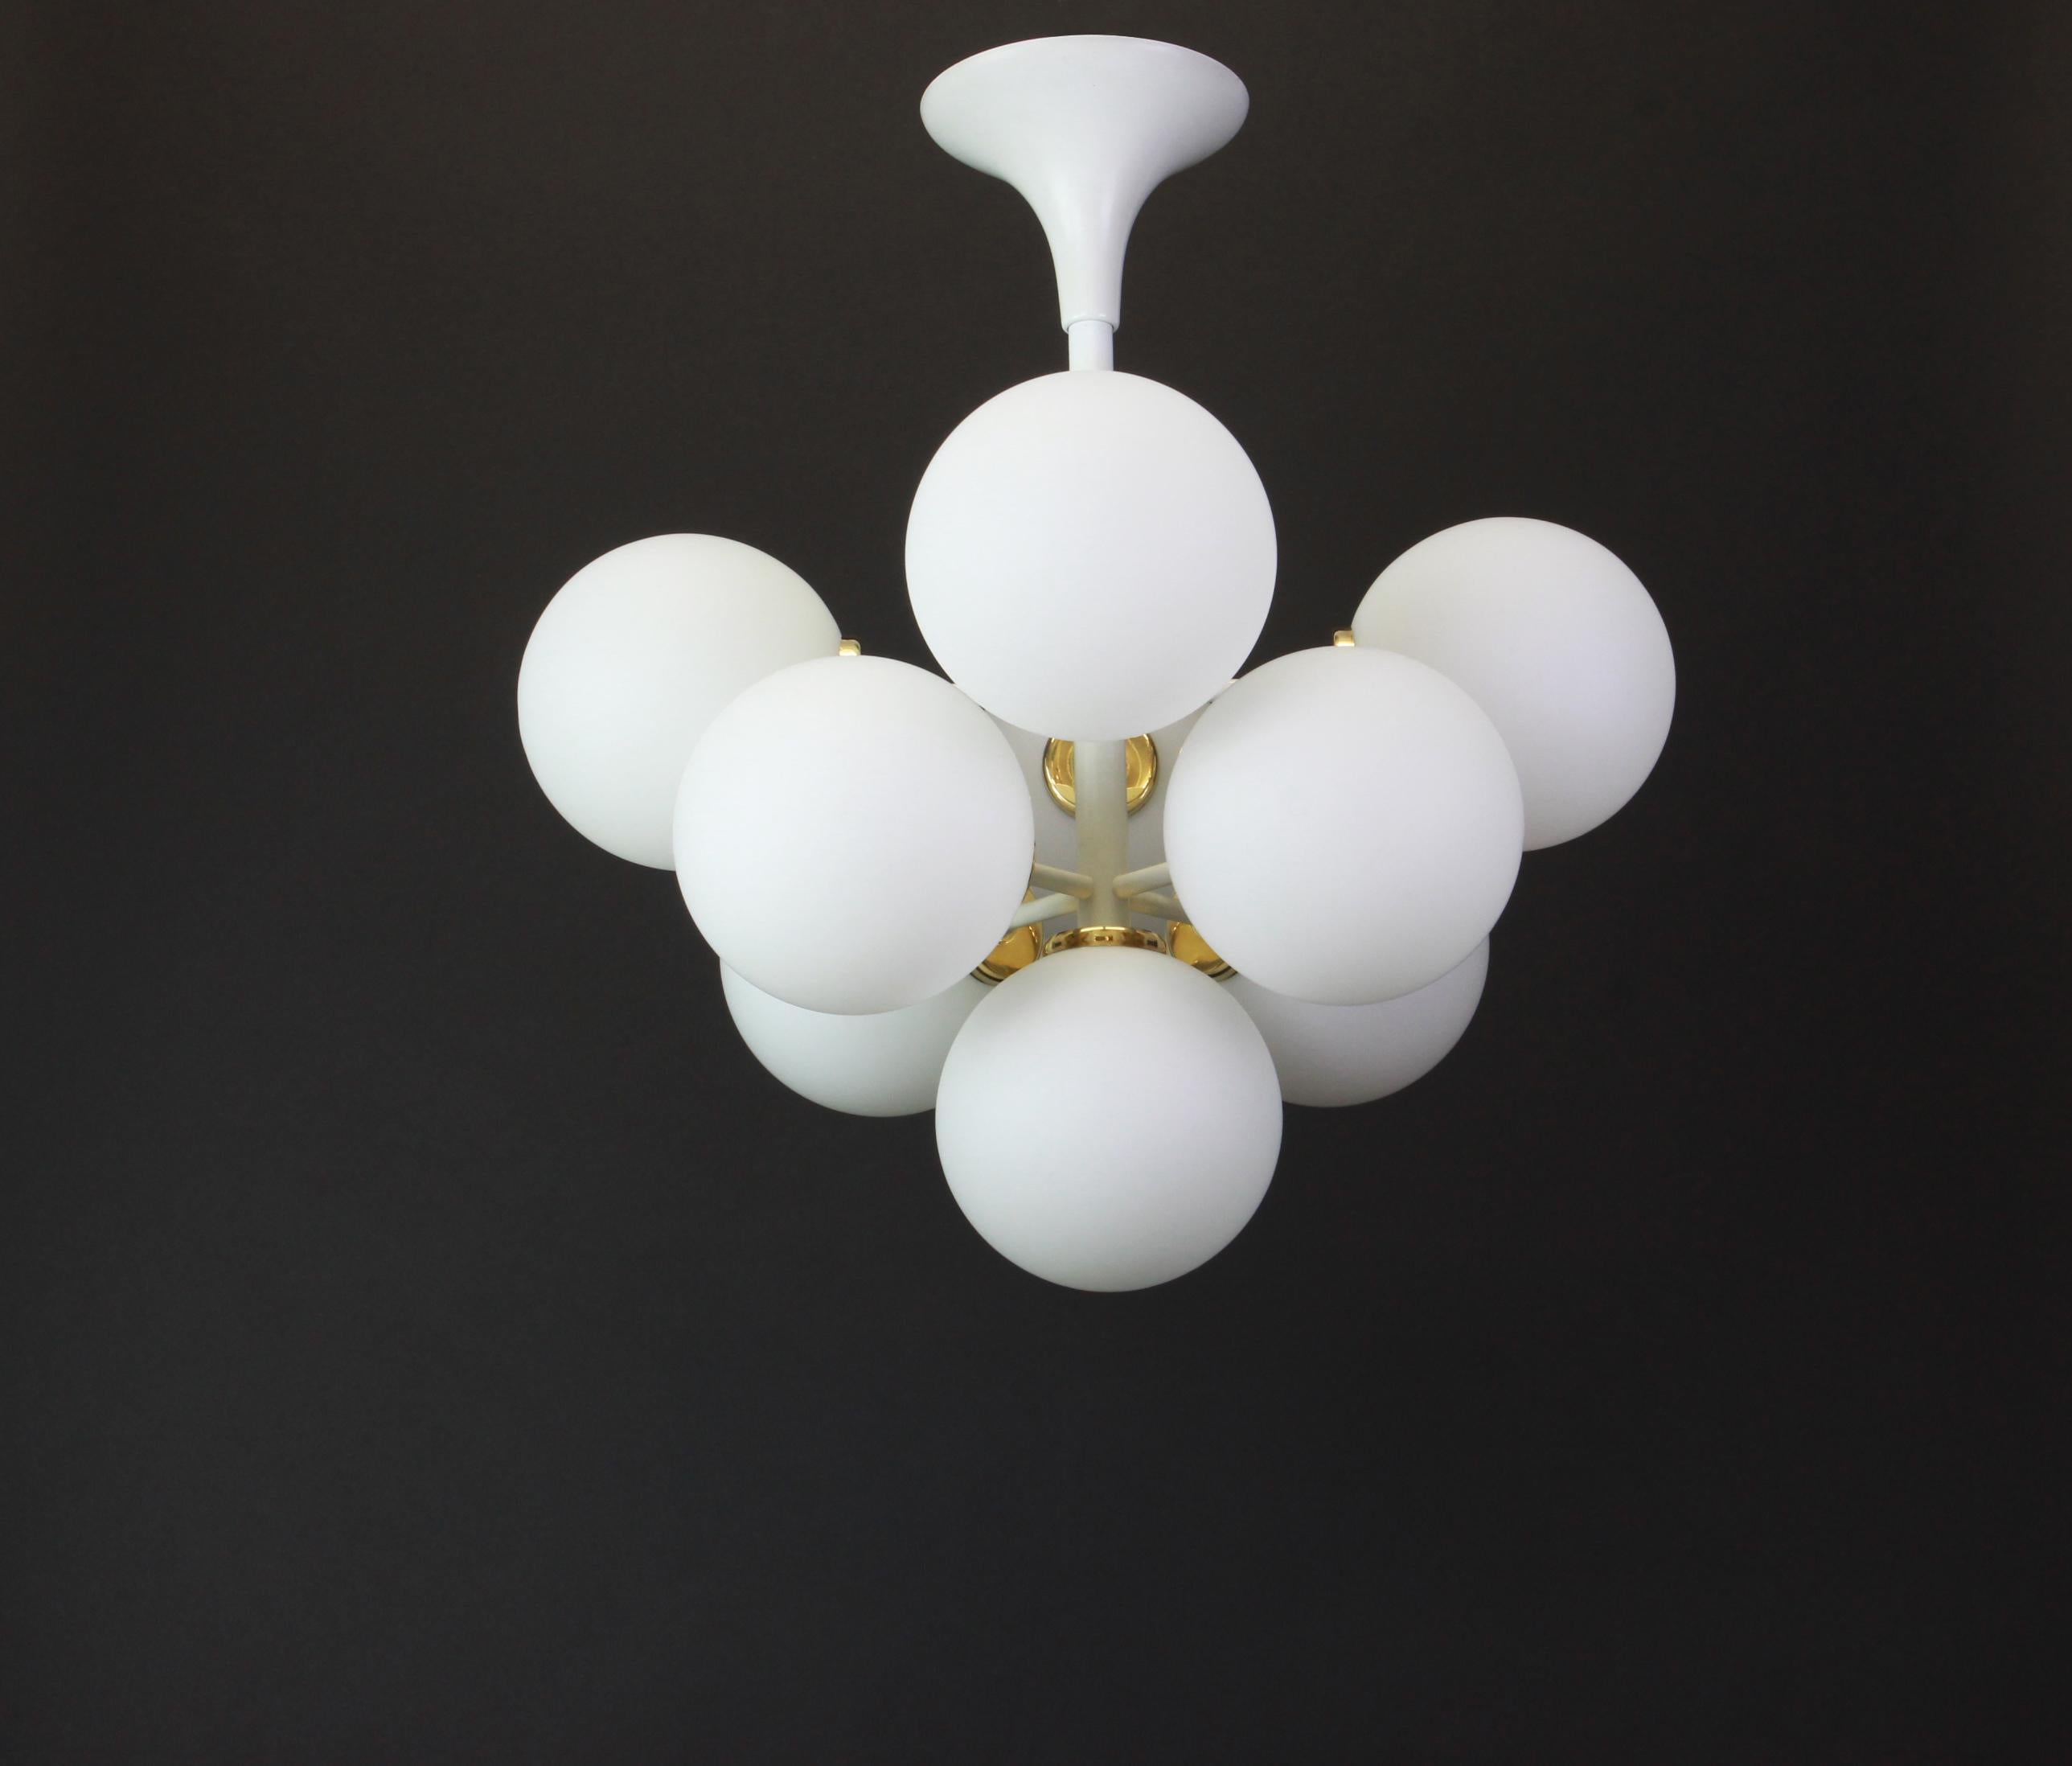 Atomic chandelier with nine-glass globes was designed by the Swiss artist and designer E.R. Nele for Temde Leuchten. The globes are hand blown and fitted with a screwing device.

High quality and in very good condition. Cleaned, well-wired and ready